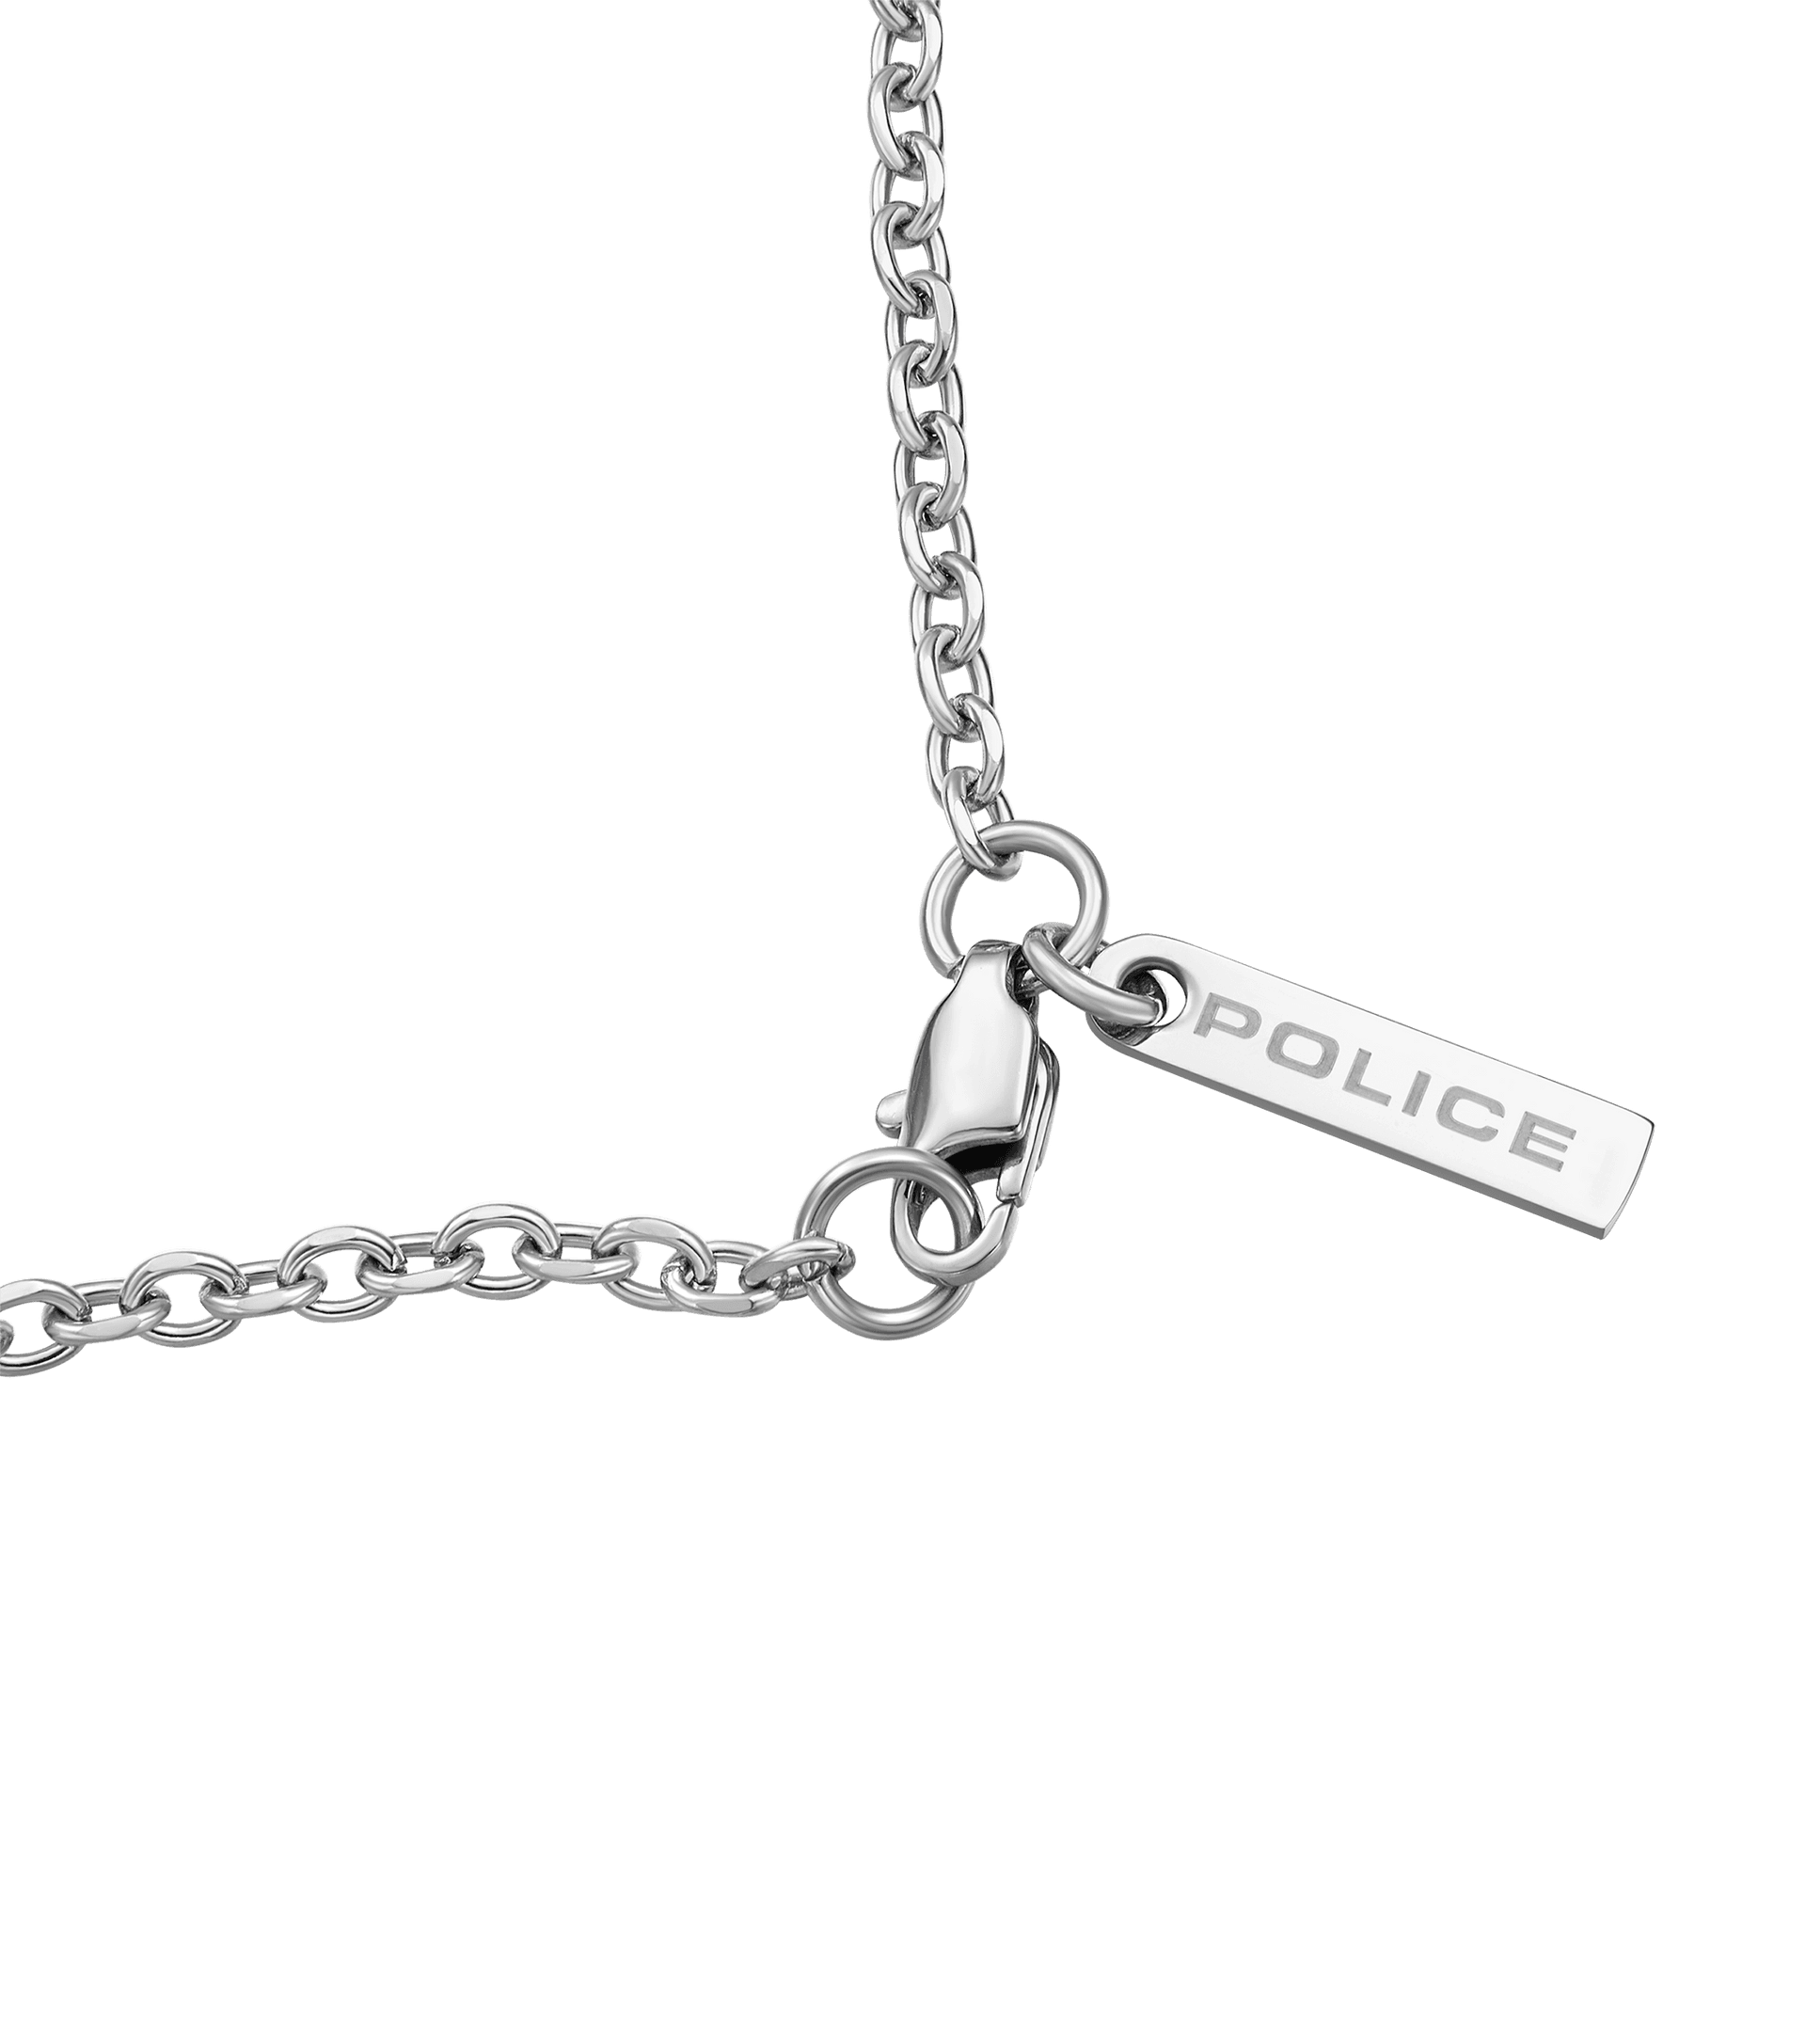 Police jewels - Urban Texture Necklace By Police For Men PEAGN0001101